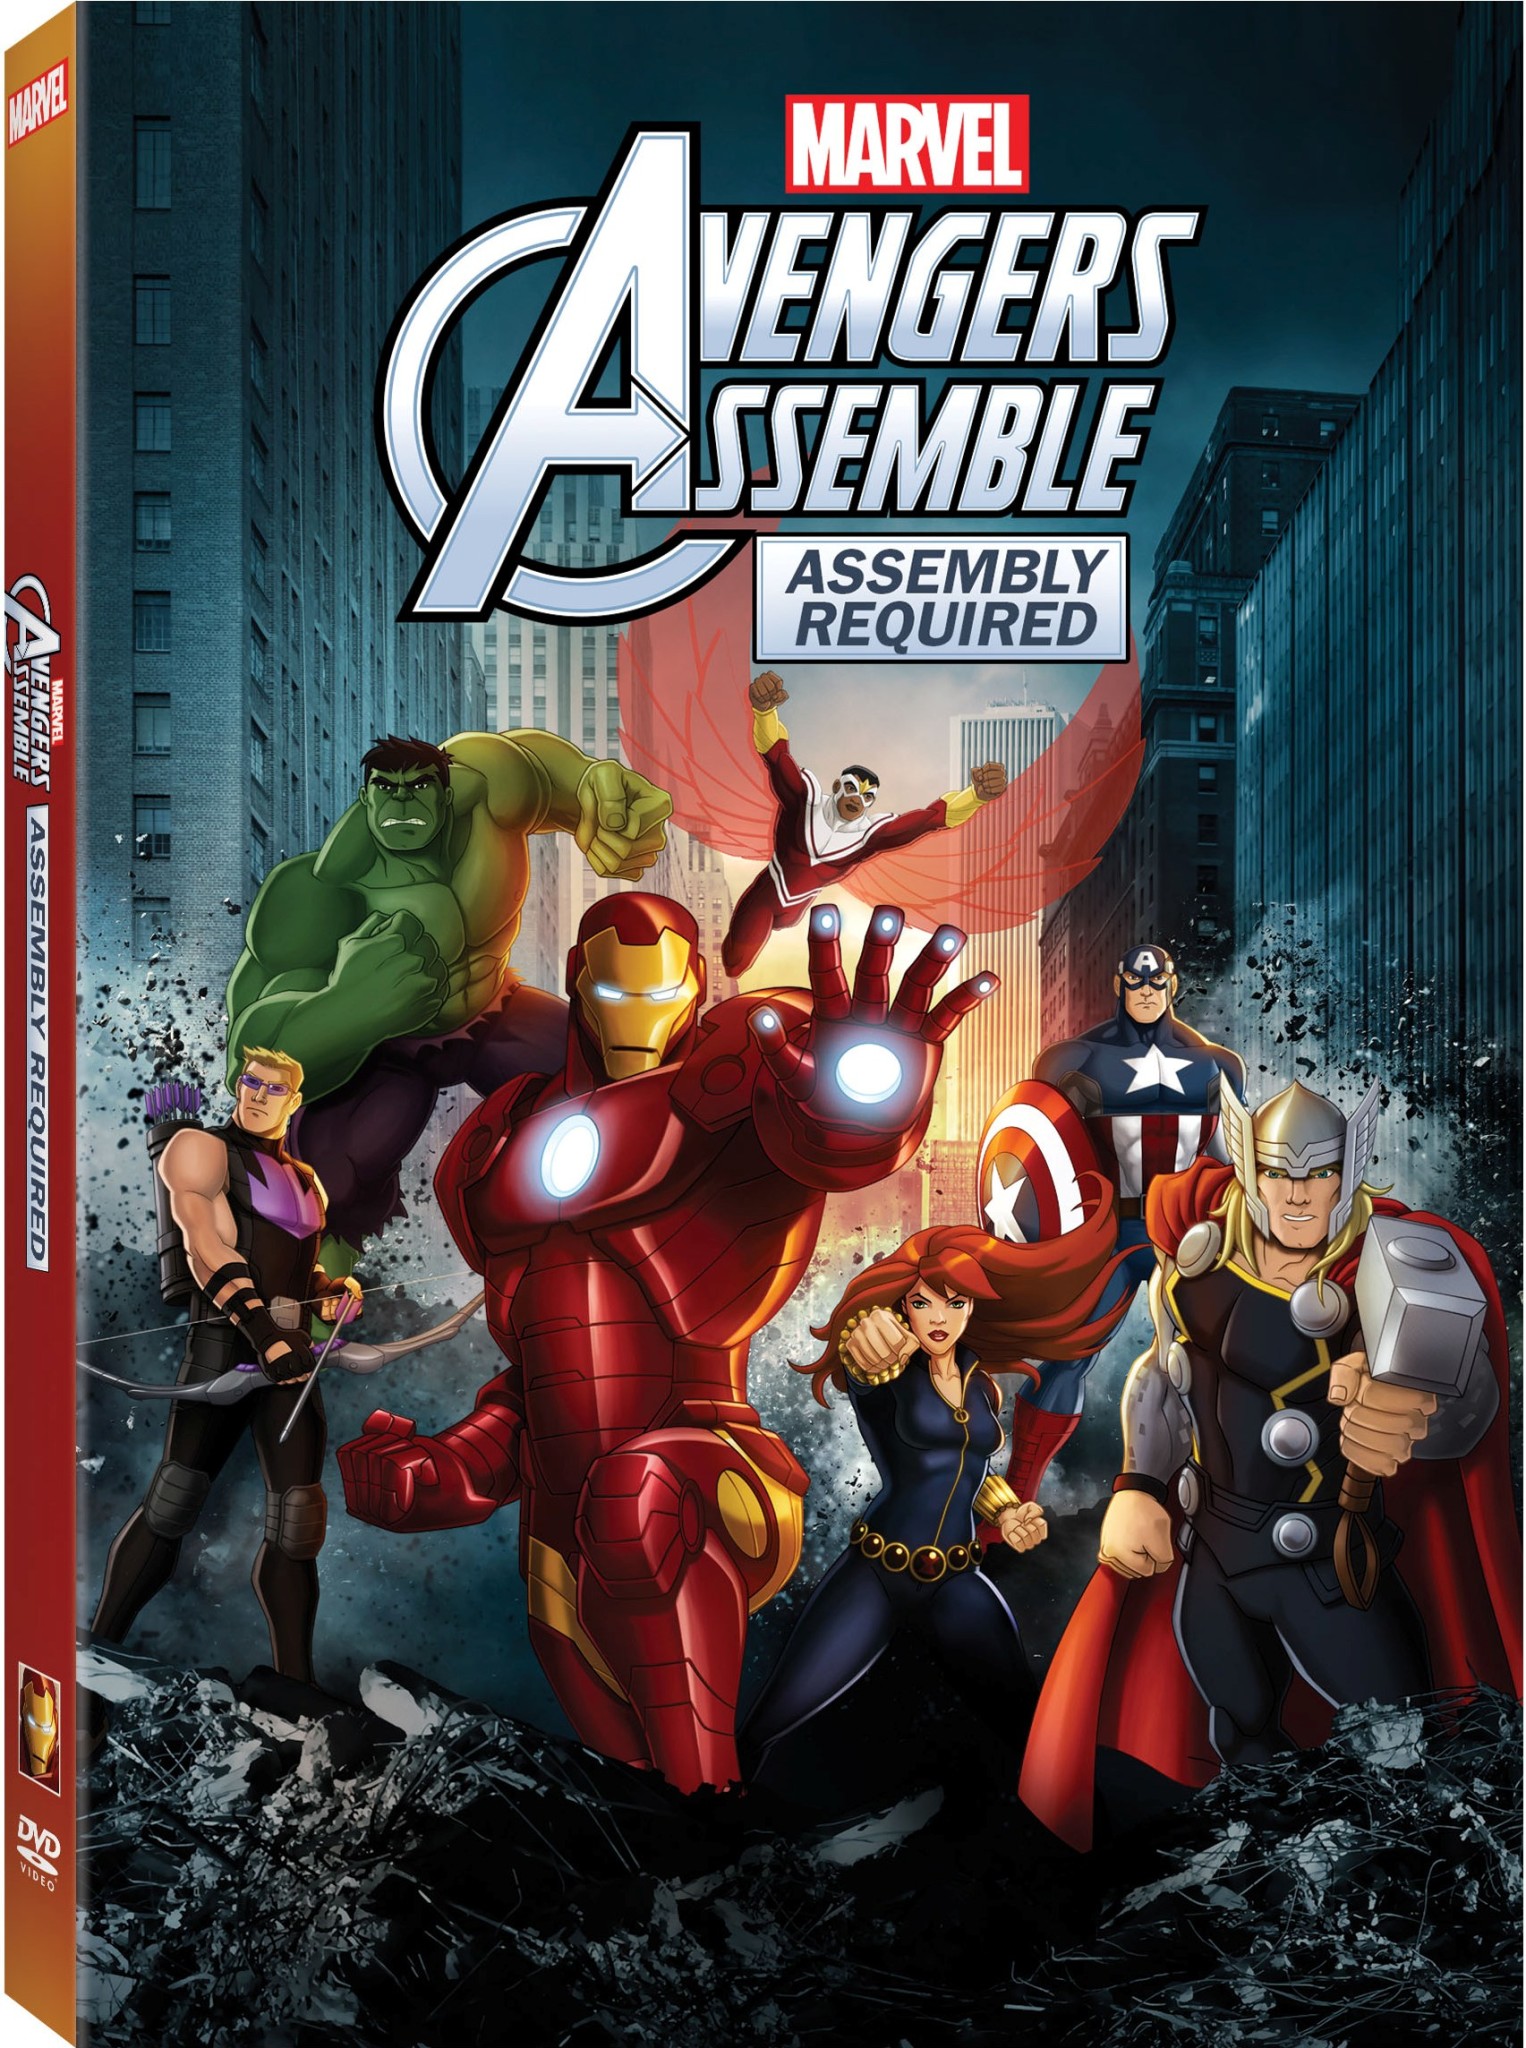 ‘Avengers Assemble: Assembly Required’ Comes to DVD October 8, 2013